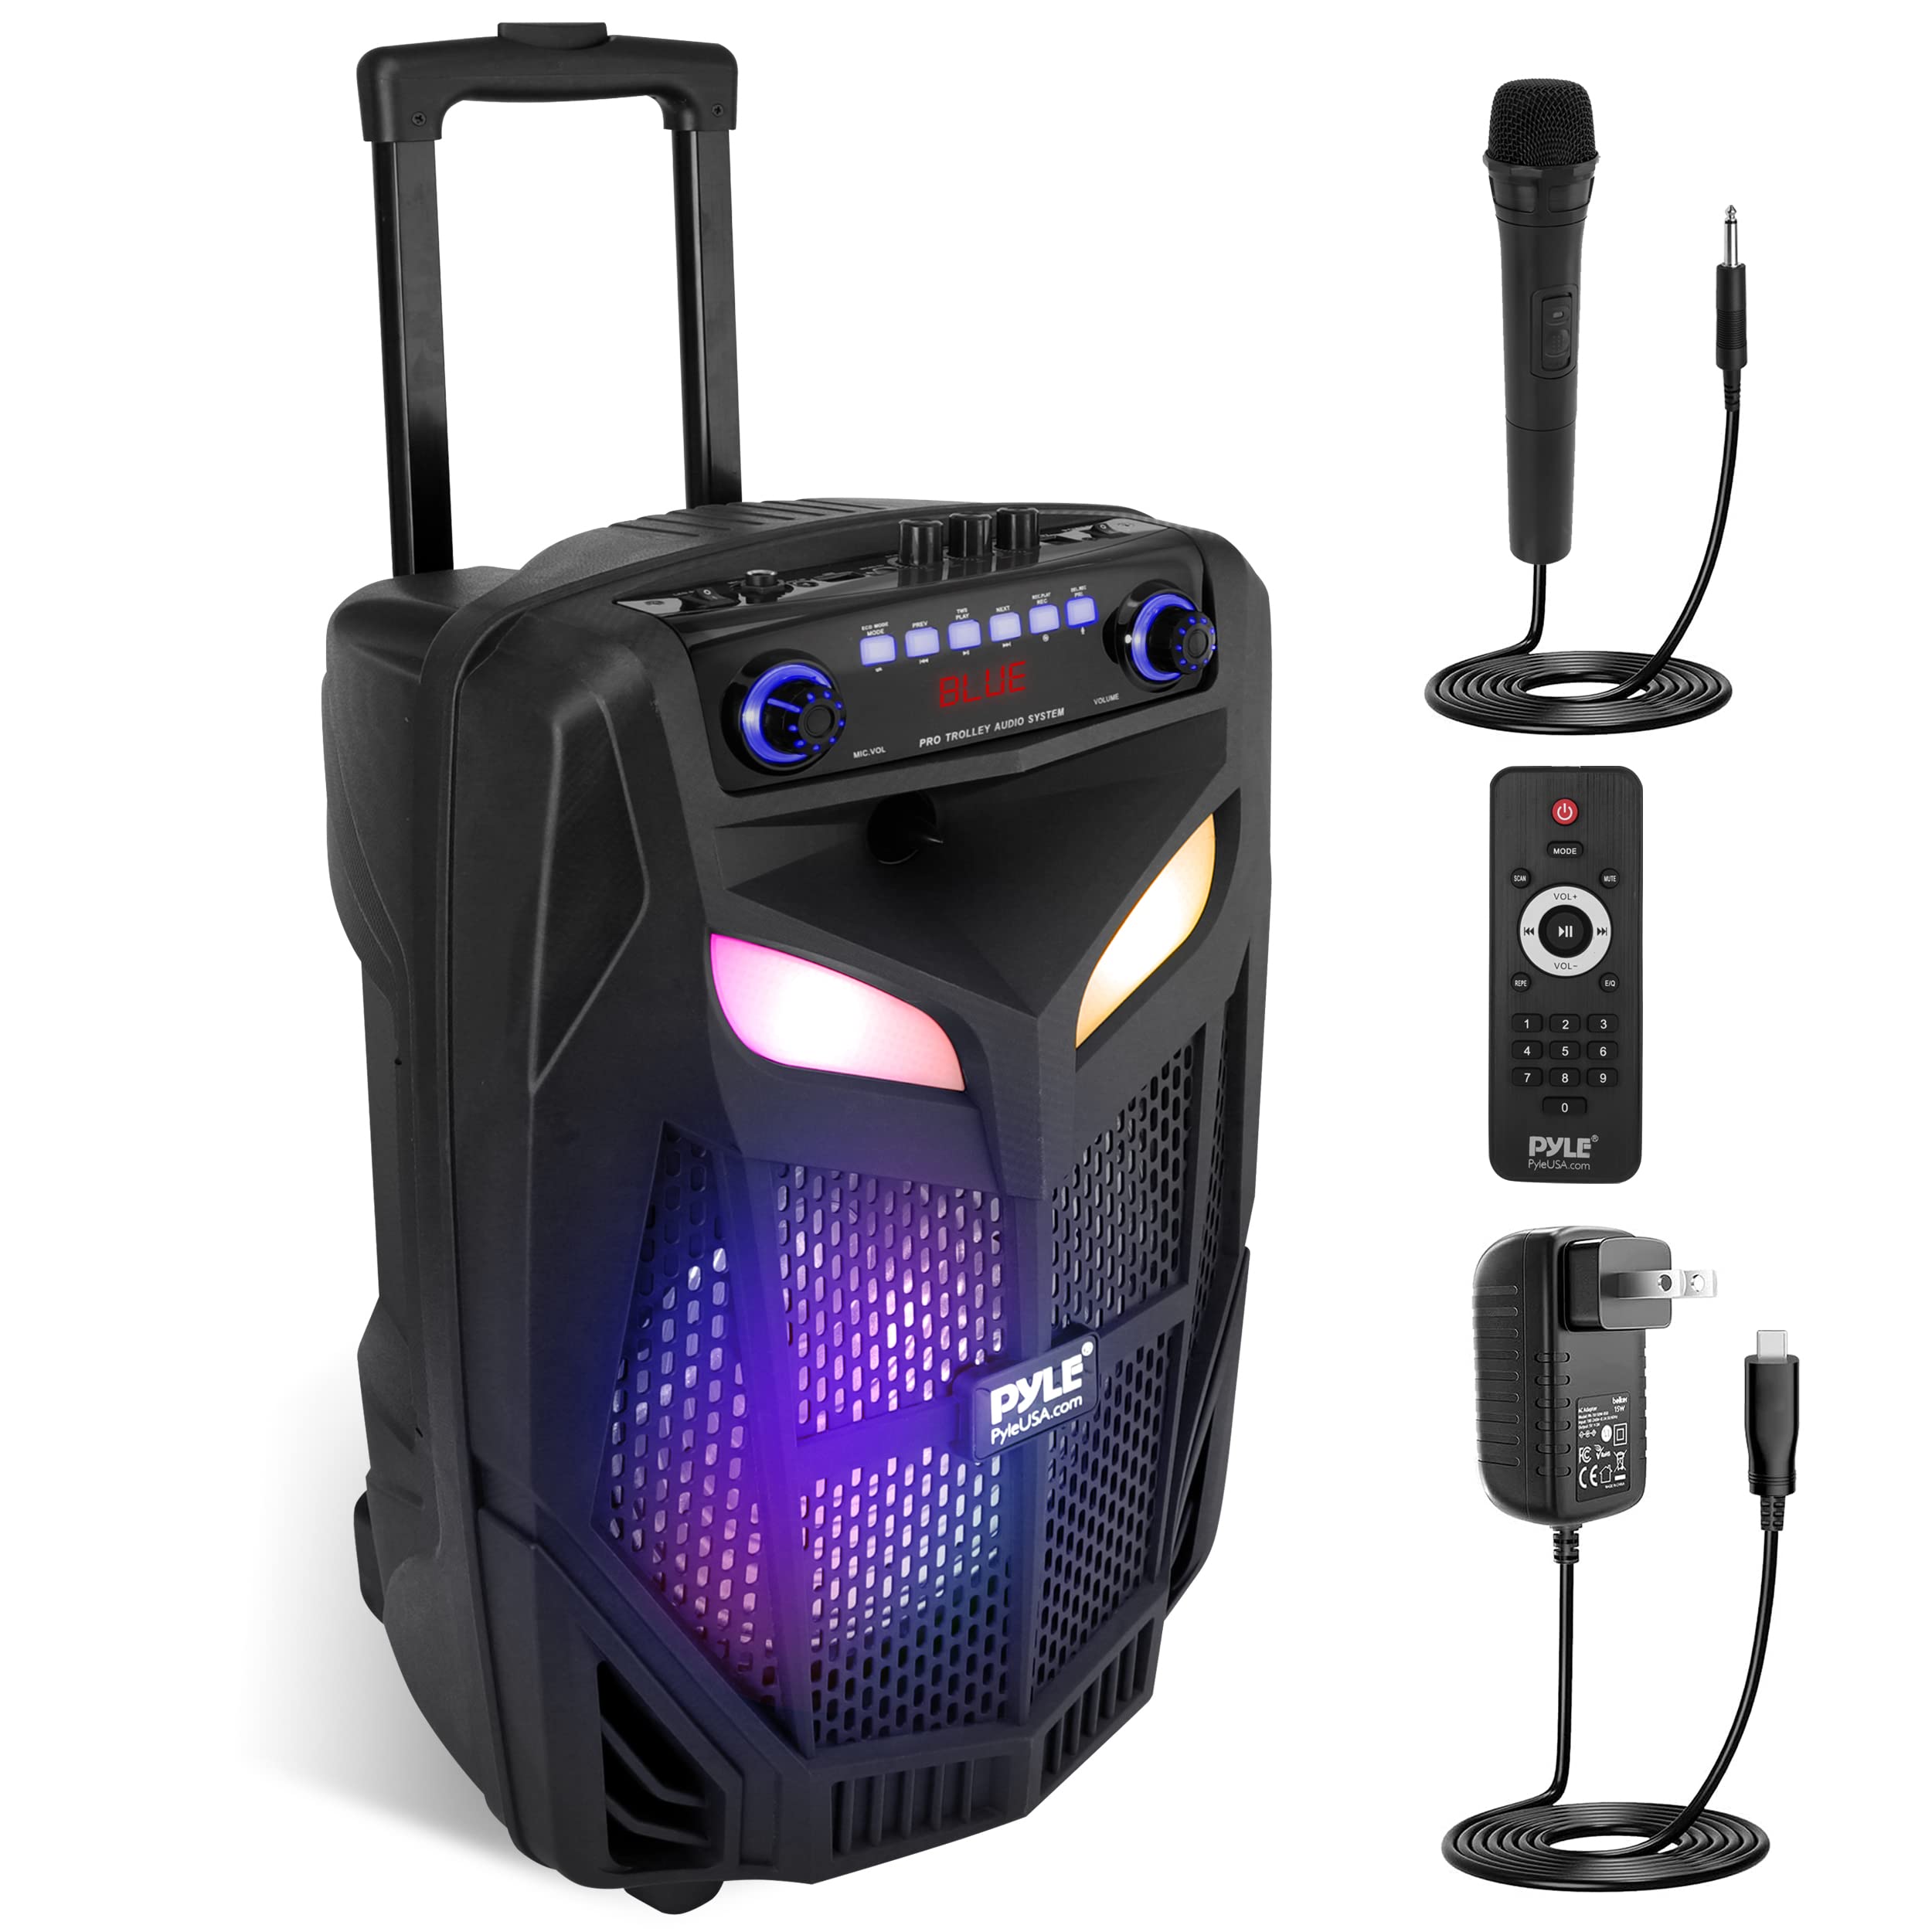 Pyle Portable Bluetooth PA Speaker System-800W 12” Indoor/Outdoor Bluetooth Speaker Portable PA System-Party Lights, USB SD Card Reader,FM Radio, Rolling Wheels-Wireless microphone,Remote- PPHP121WMB